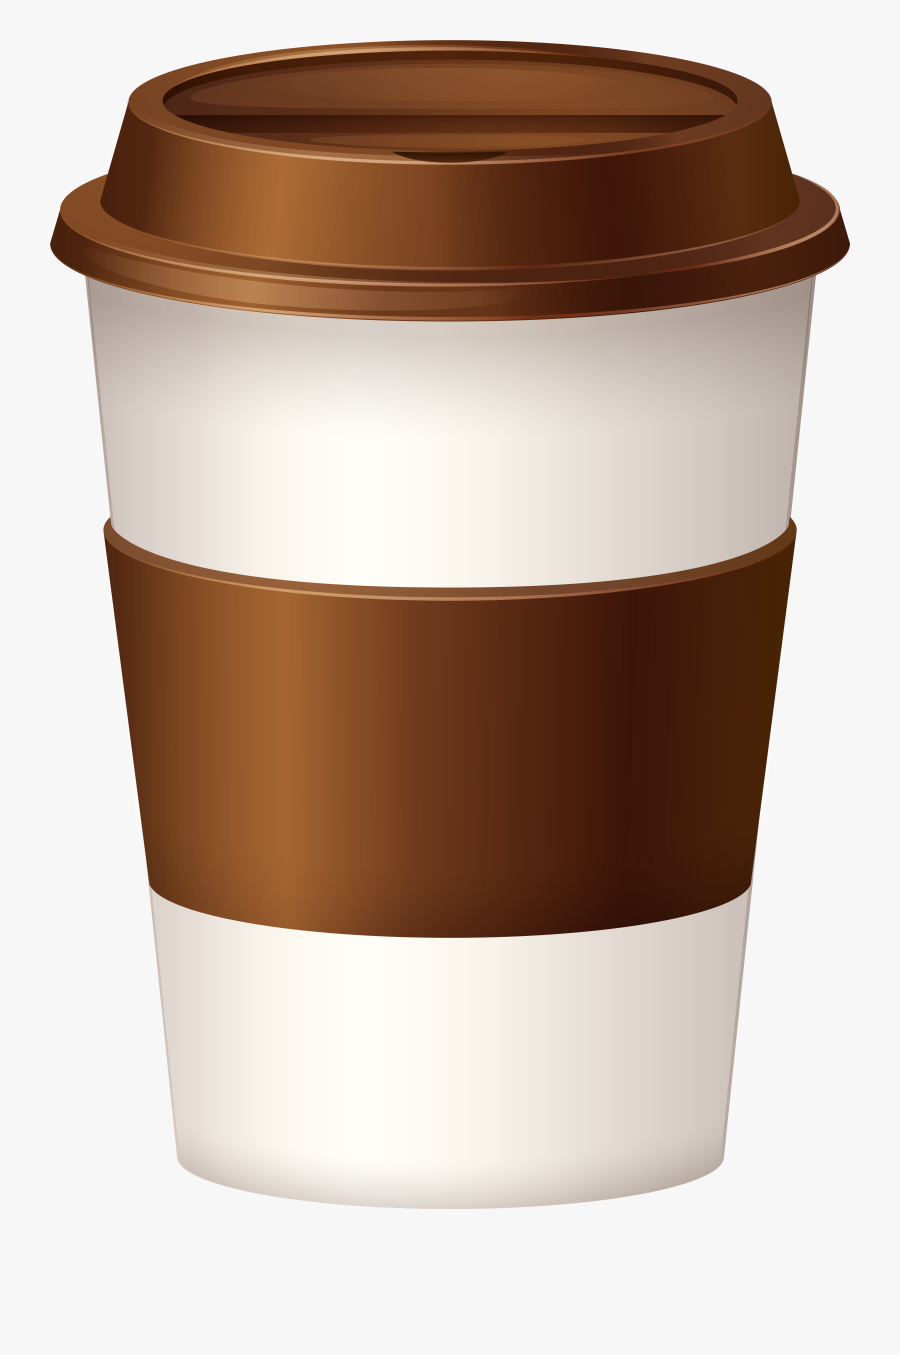 Hot Coffee Cup Clipart Image - Coffee Cup Clipart Png, Transparent Clipart